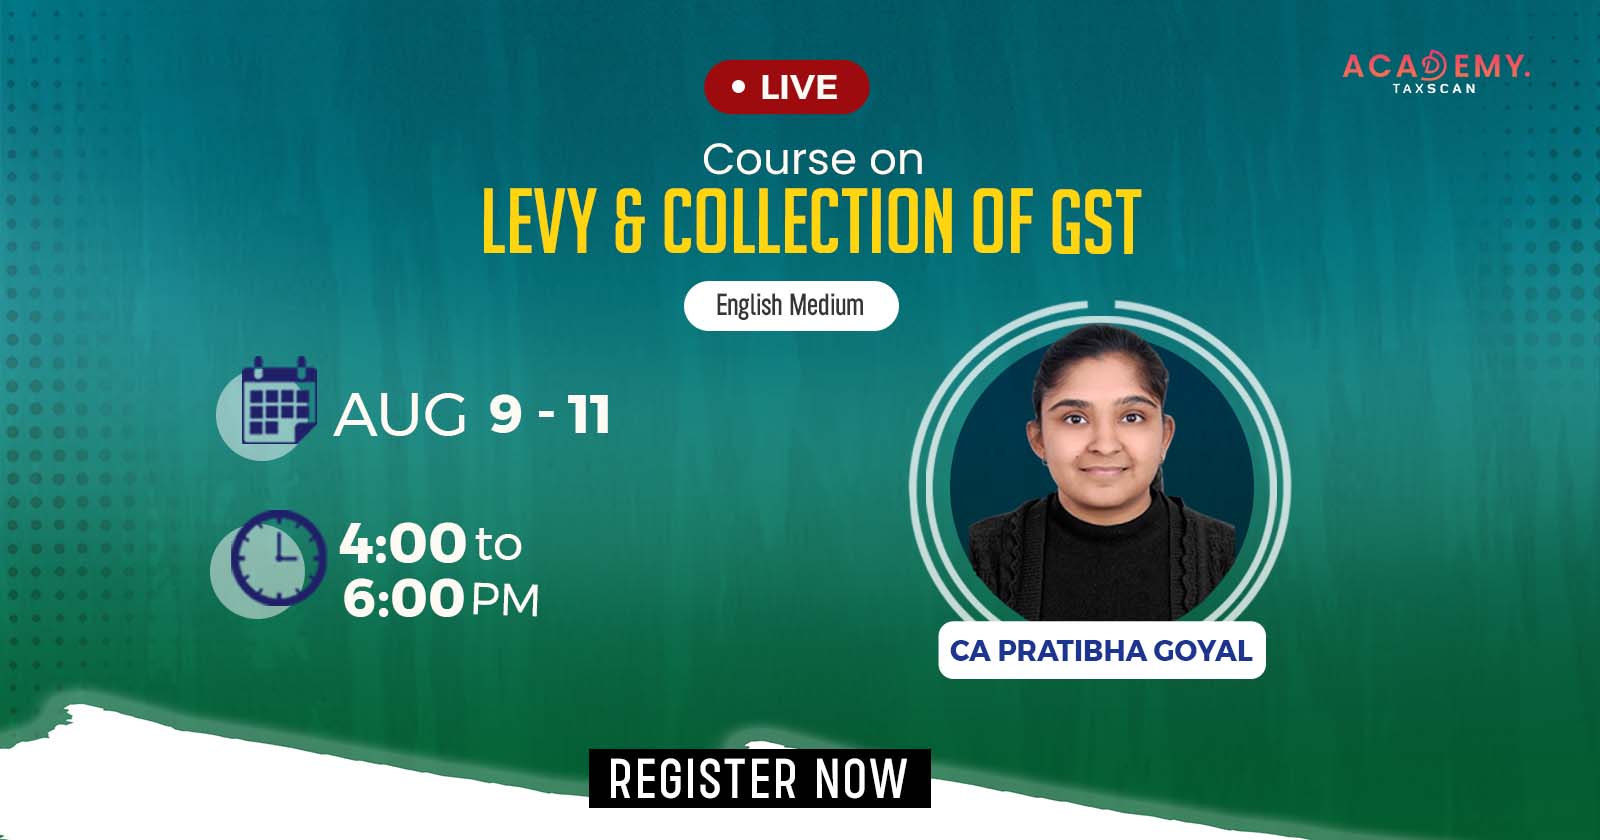 Live Course - Live Course on Levy and Collection of GST - Levy and Collection of GST - GST - GST Live Course - GST Lavy and Collection - online certificate course - certificate course 2023 - Taxscan Academy